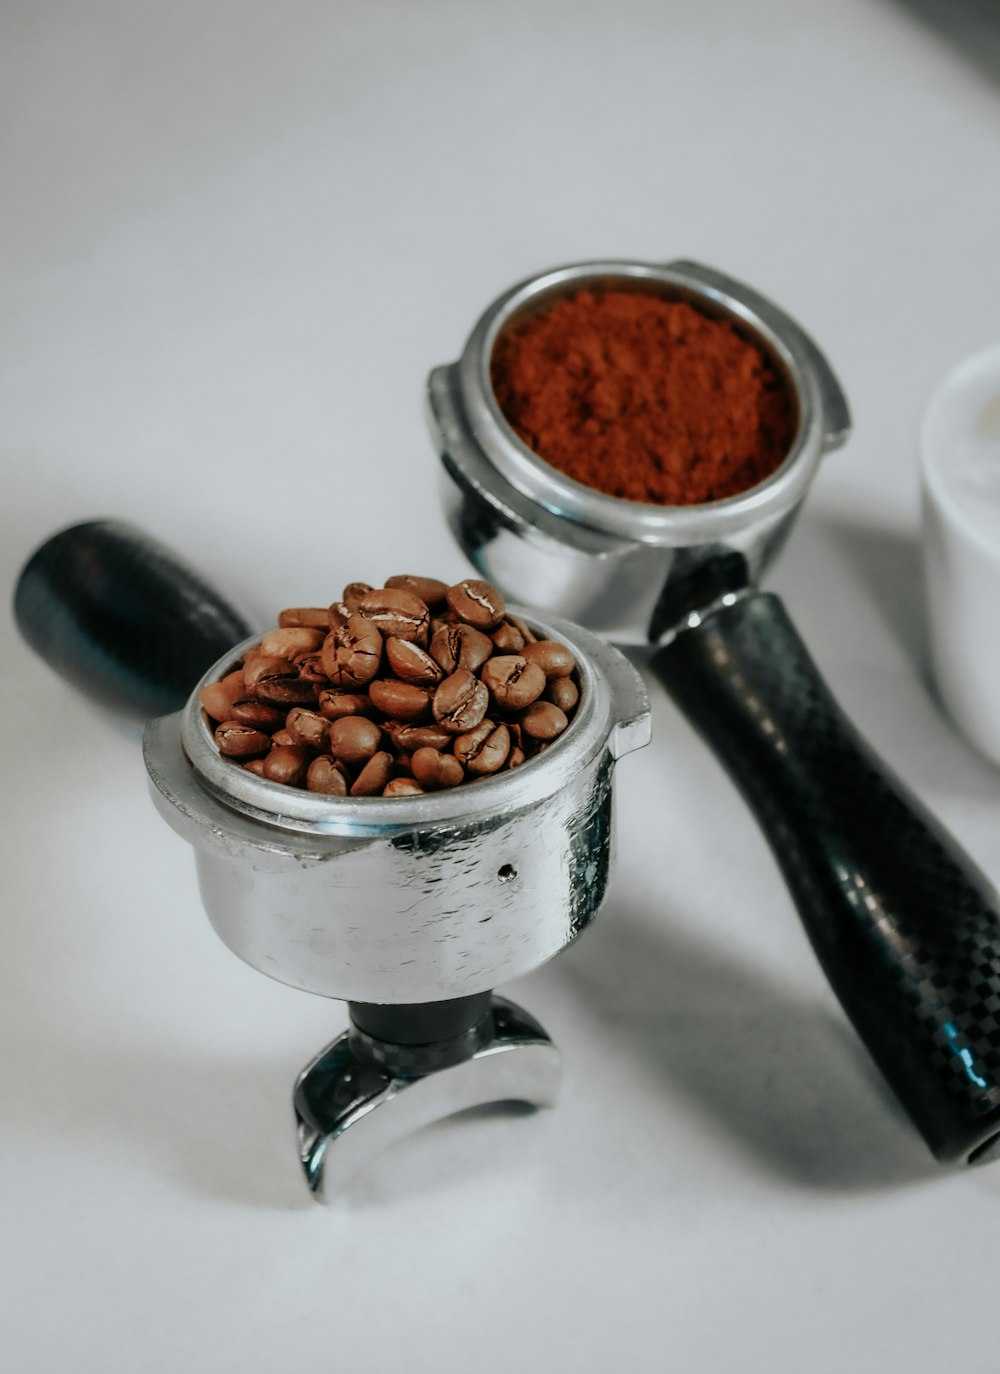 a coffee grinder filled with coffee beans next to a cup of coffee